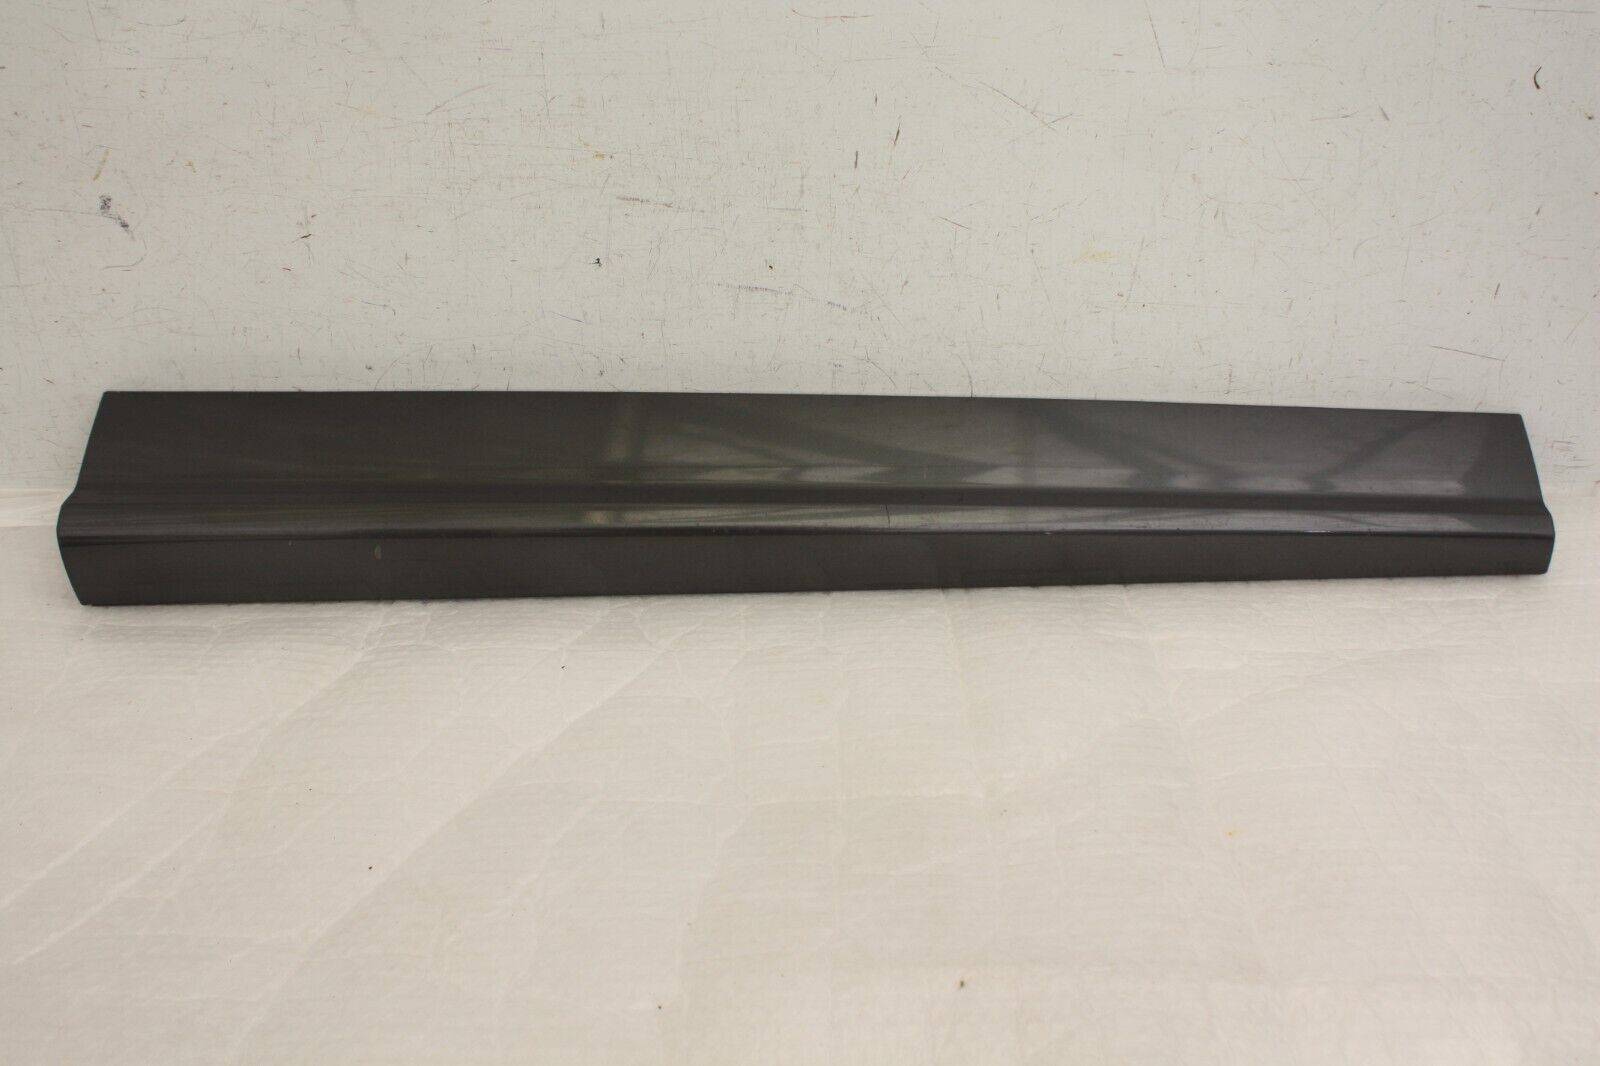 Audi Q5 S Line Front Right Door Moulding 2017 TO 2020 80A853960B Genuine 176335426593